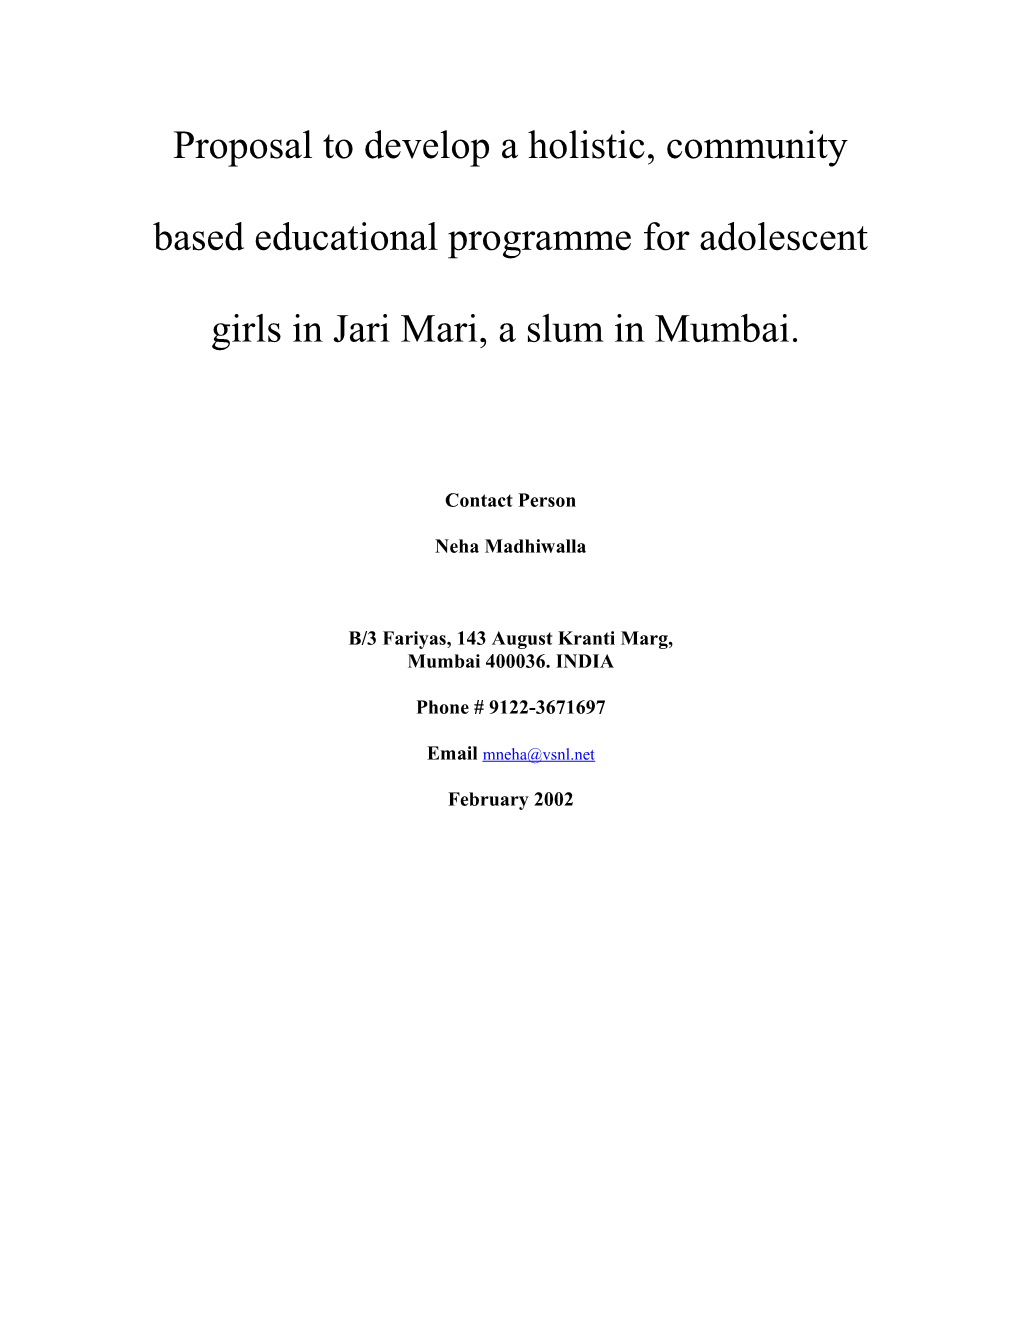 Proposal to Develop a Holistic, Community Based Educational Programme for Adolescent Girls